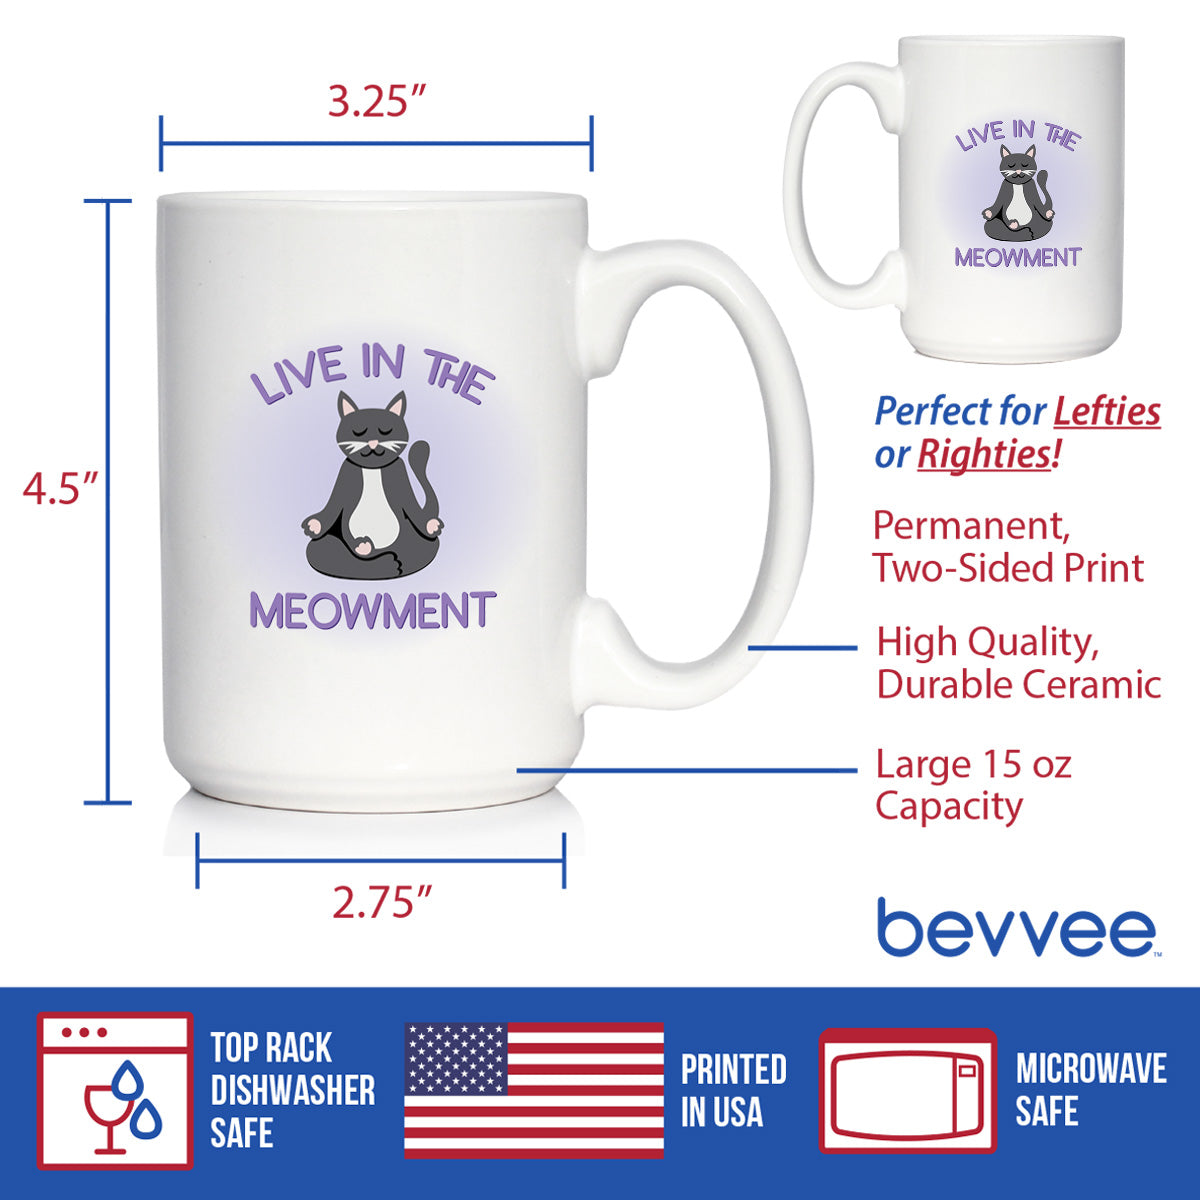 Live In The Meowment Coffee Mug - Funny Cat Gifts and Meditation Themed Decor